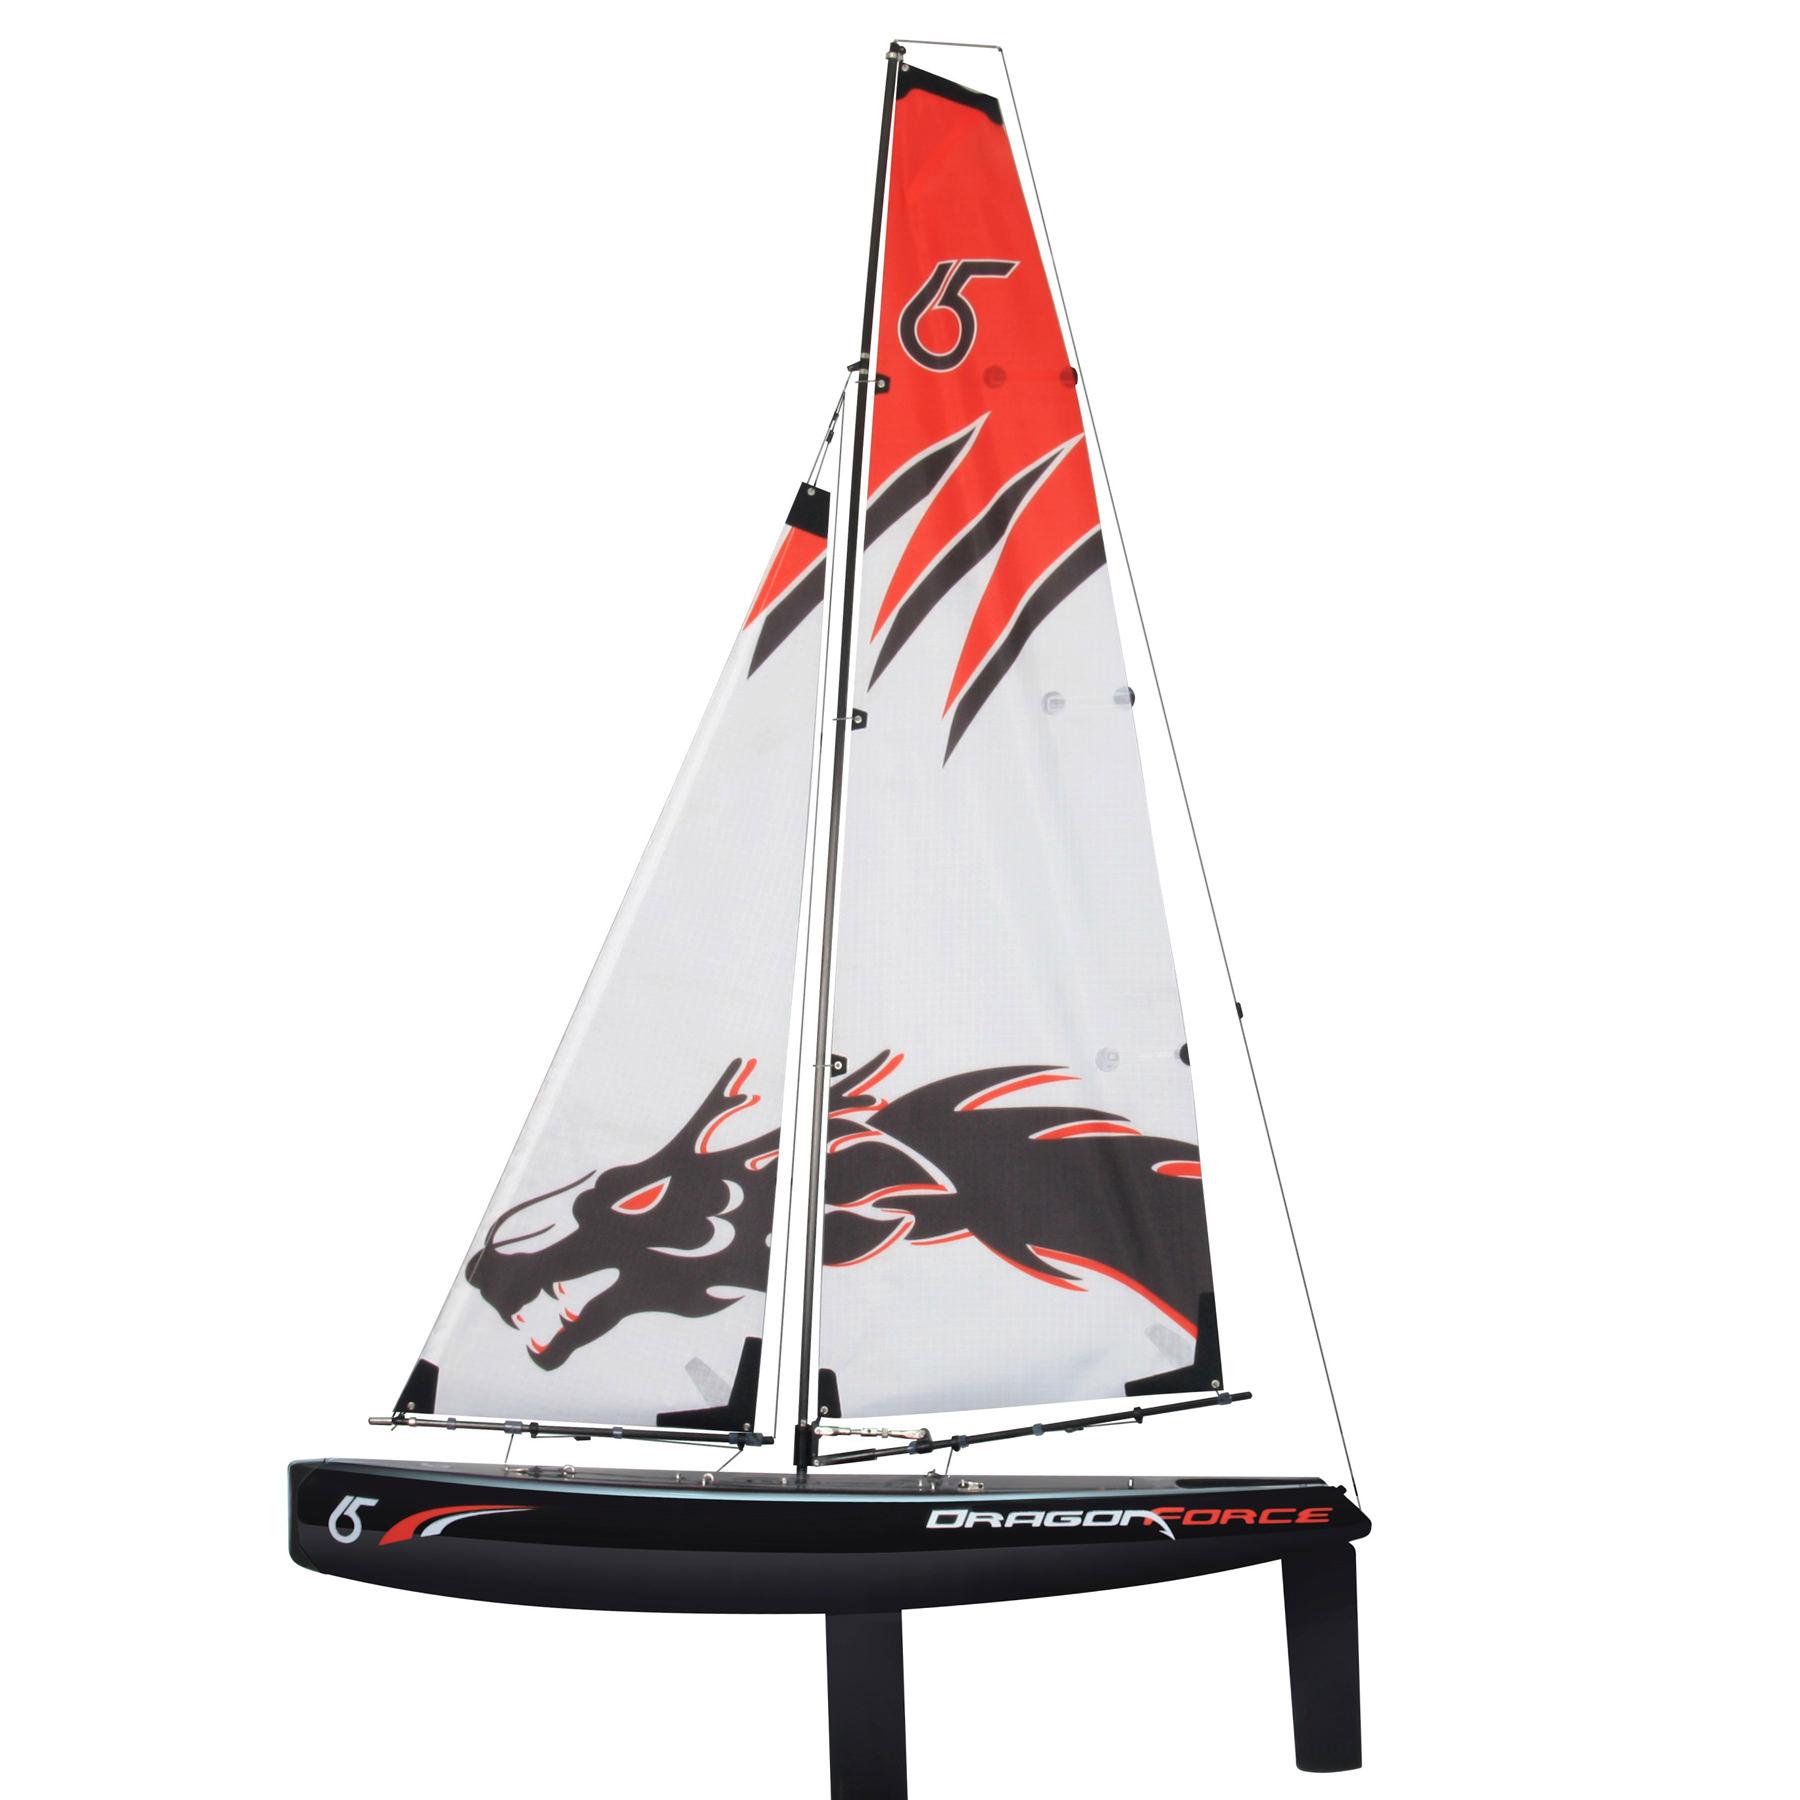 Rg65 Rc Sailboat: RG65 RC Sailboat: Sleek, Streamlined Design for Optimal Performance on the Water